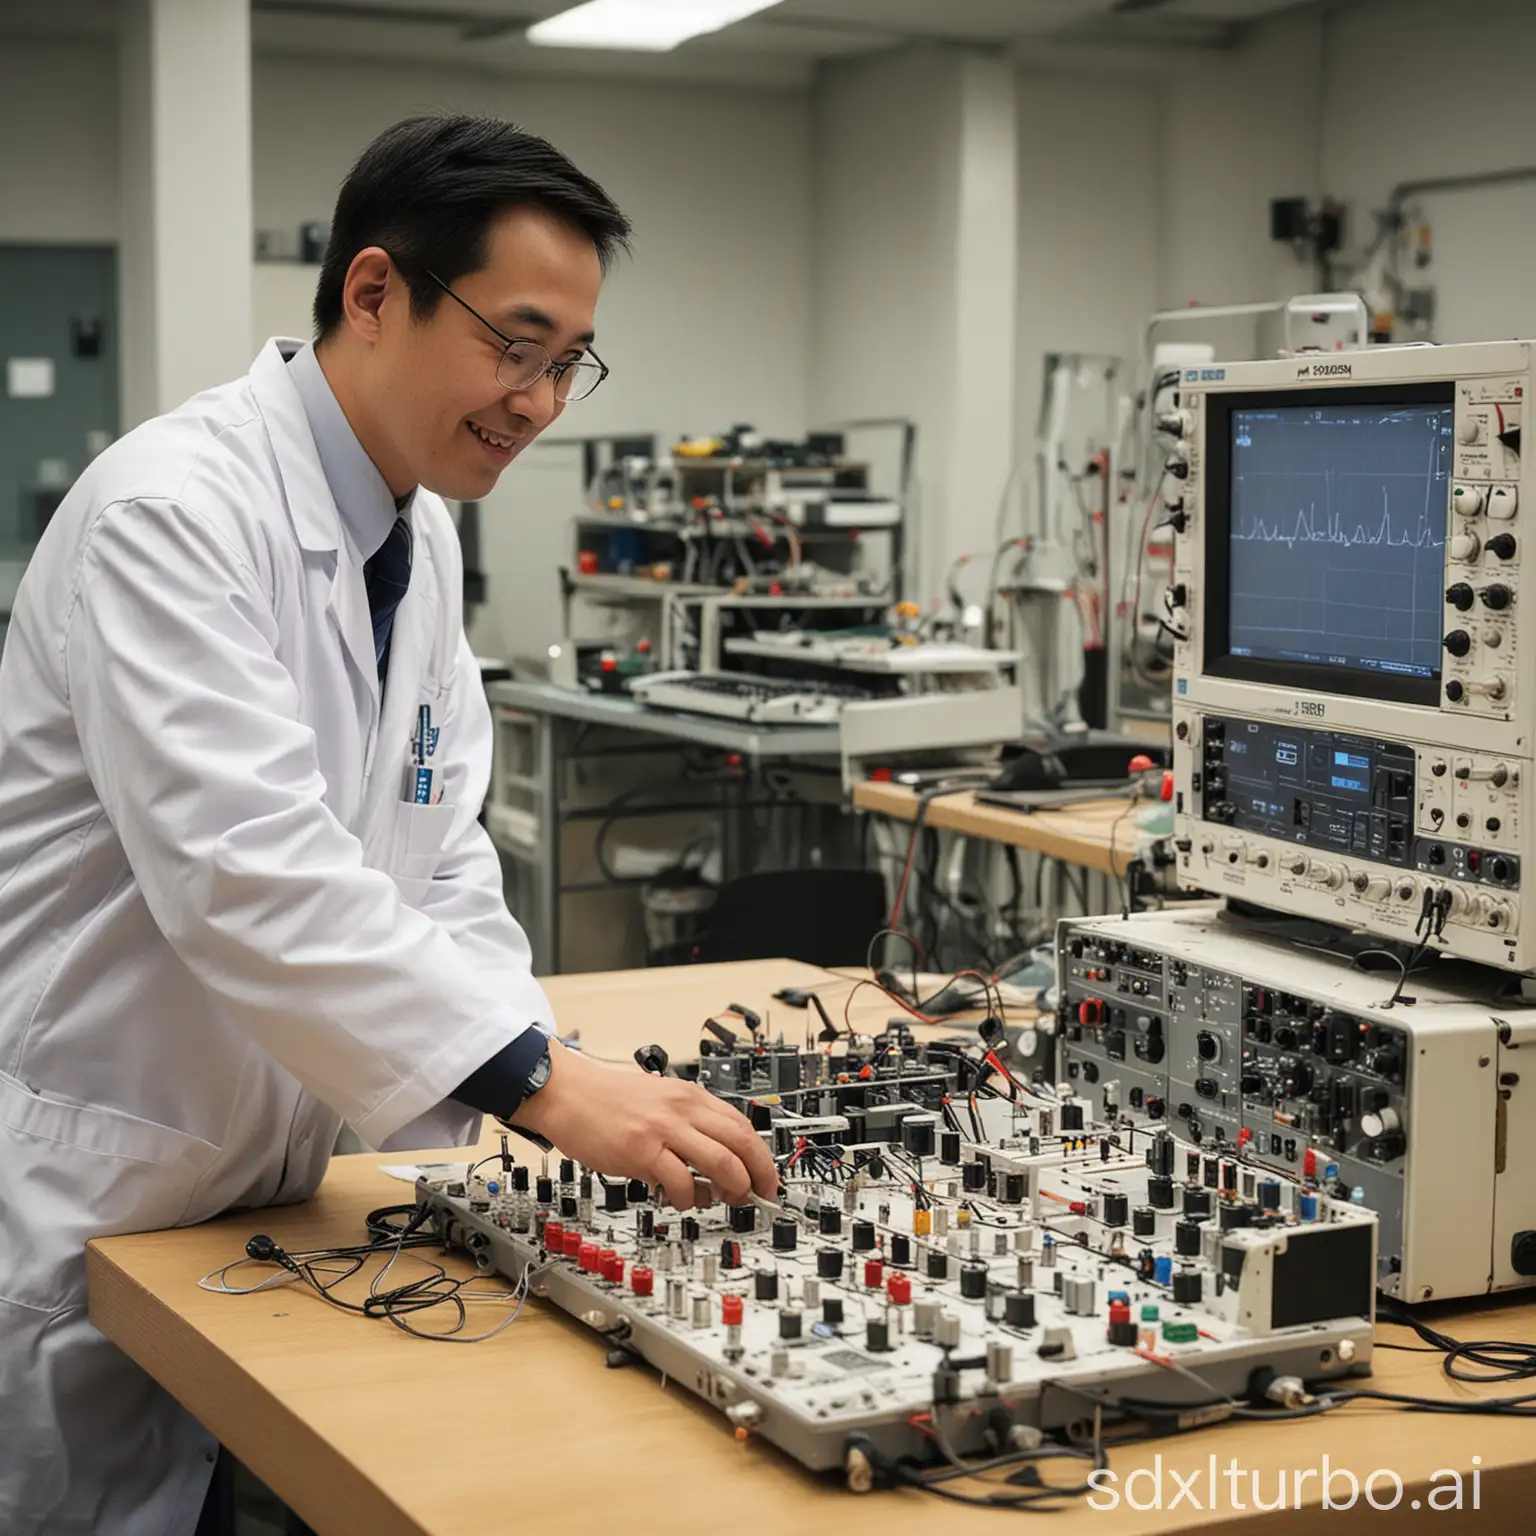 Location: A high-tech laboratory, with oscilloscopes, power modules, blueprints, and various instruments and tools on the table. Event: A Chinese engineer is demonstrating the working principle of zero voltage switching (ZVS). Person: The engineer is a middle-aged man wearing a white lab coat, glasses, focused and confident. Description: Panoramic display Entire laboratory perspective, engineer standing at the front of the workbench, smiling.